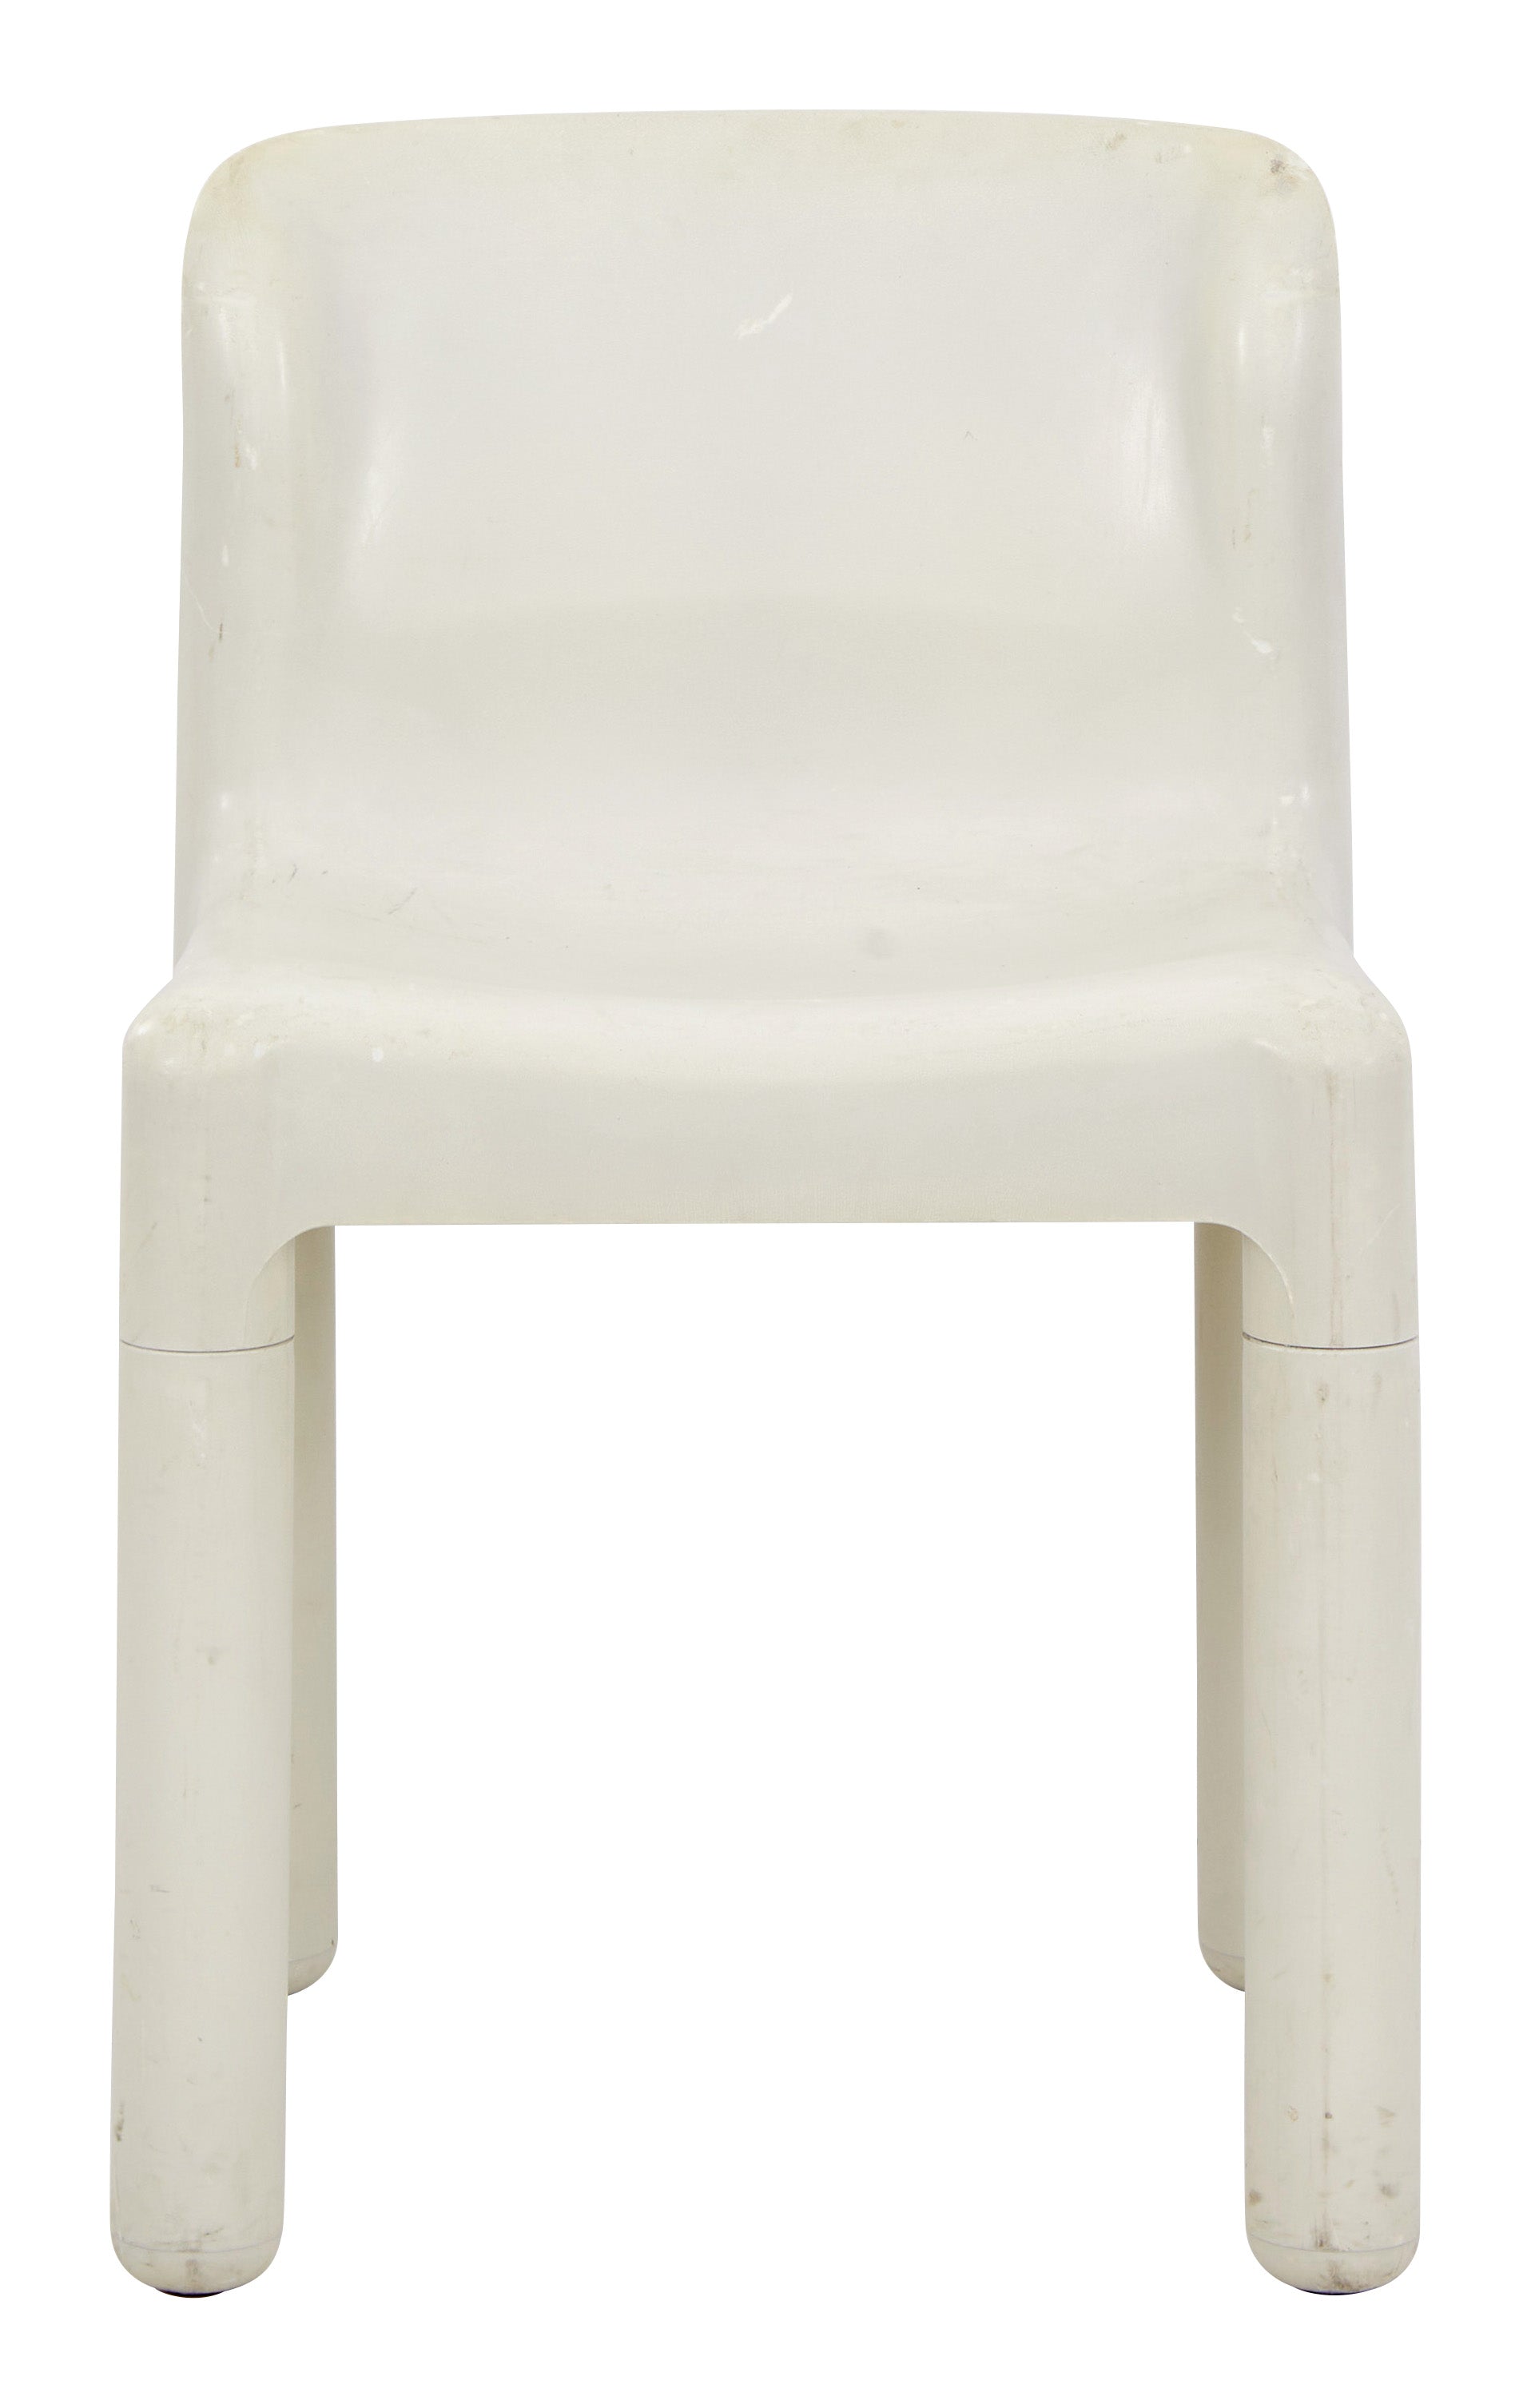 Vintage Molded Plastic Dining Chair